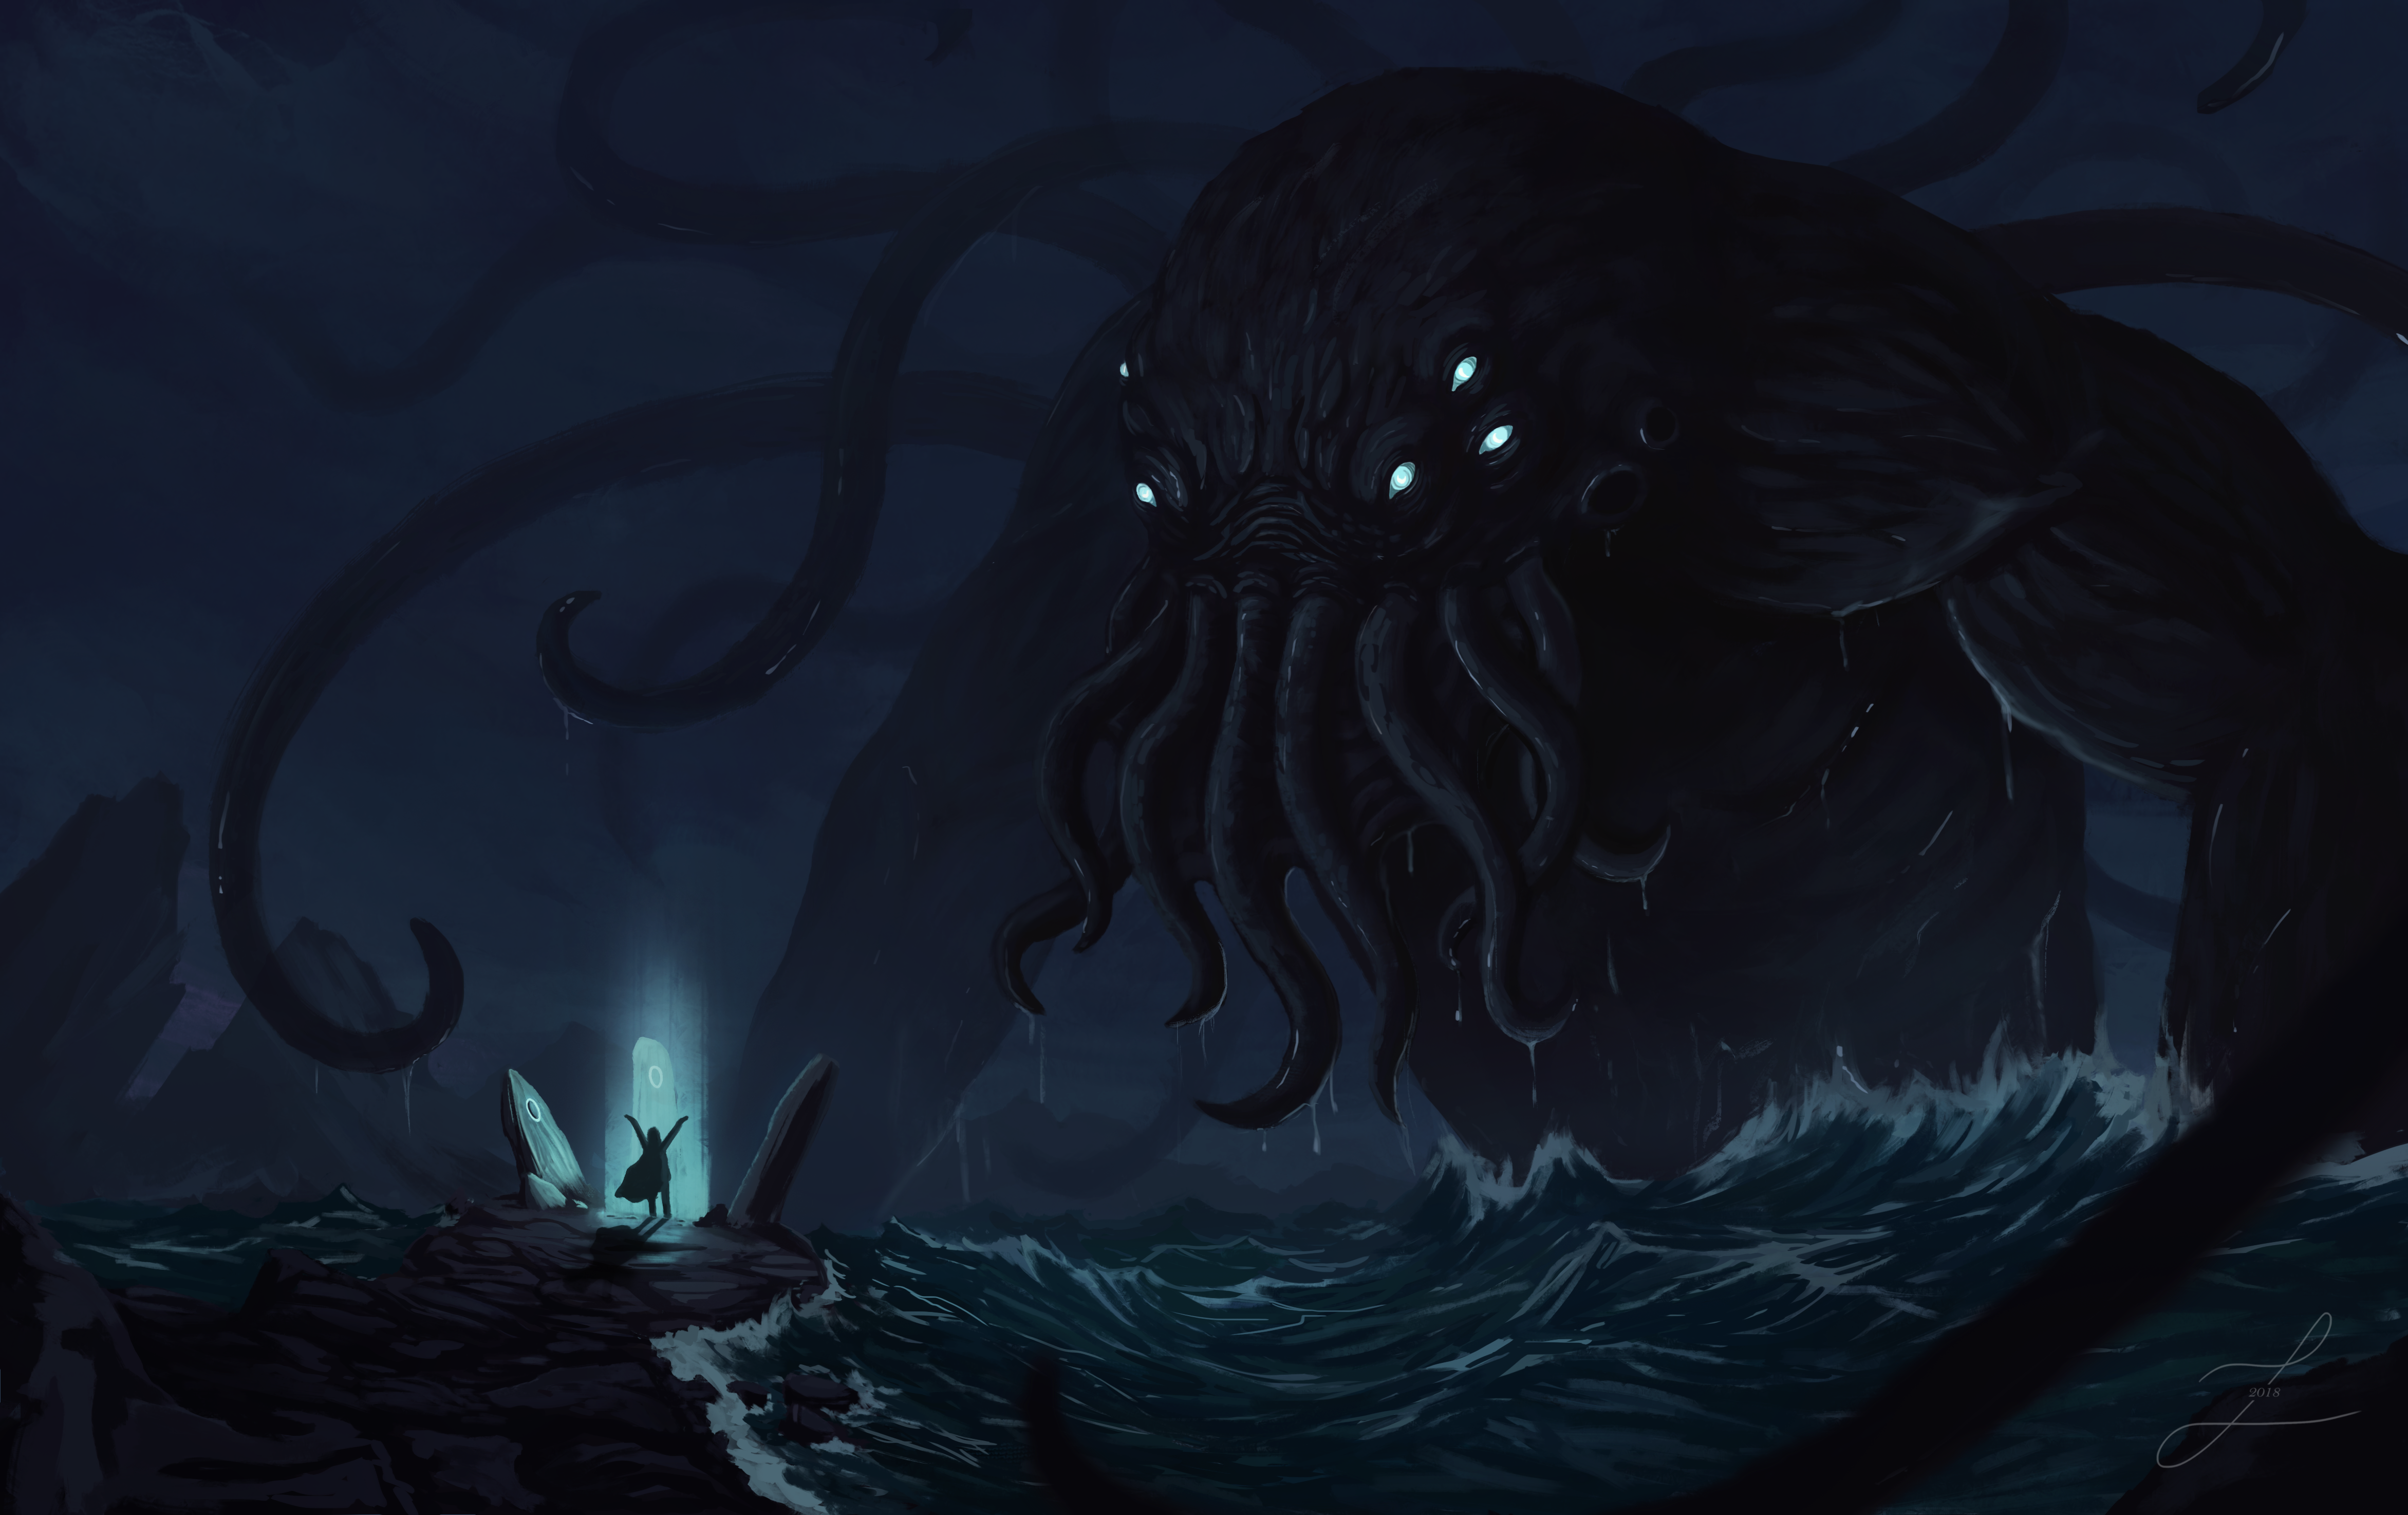 General 4687x2948 digital art artwork illustration fantasy art magic water sea people silhouette lights dark fictional fictional creatures creature Cthulhu H. P. Lovecraft drawing digital painting tentacles nature landscape sky skyscape wizard outdoors storm sea monsters rain concept art character design 